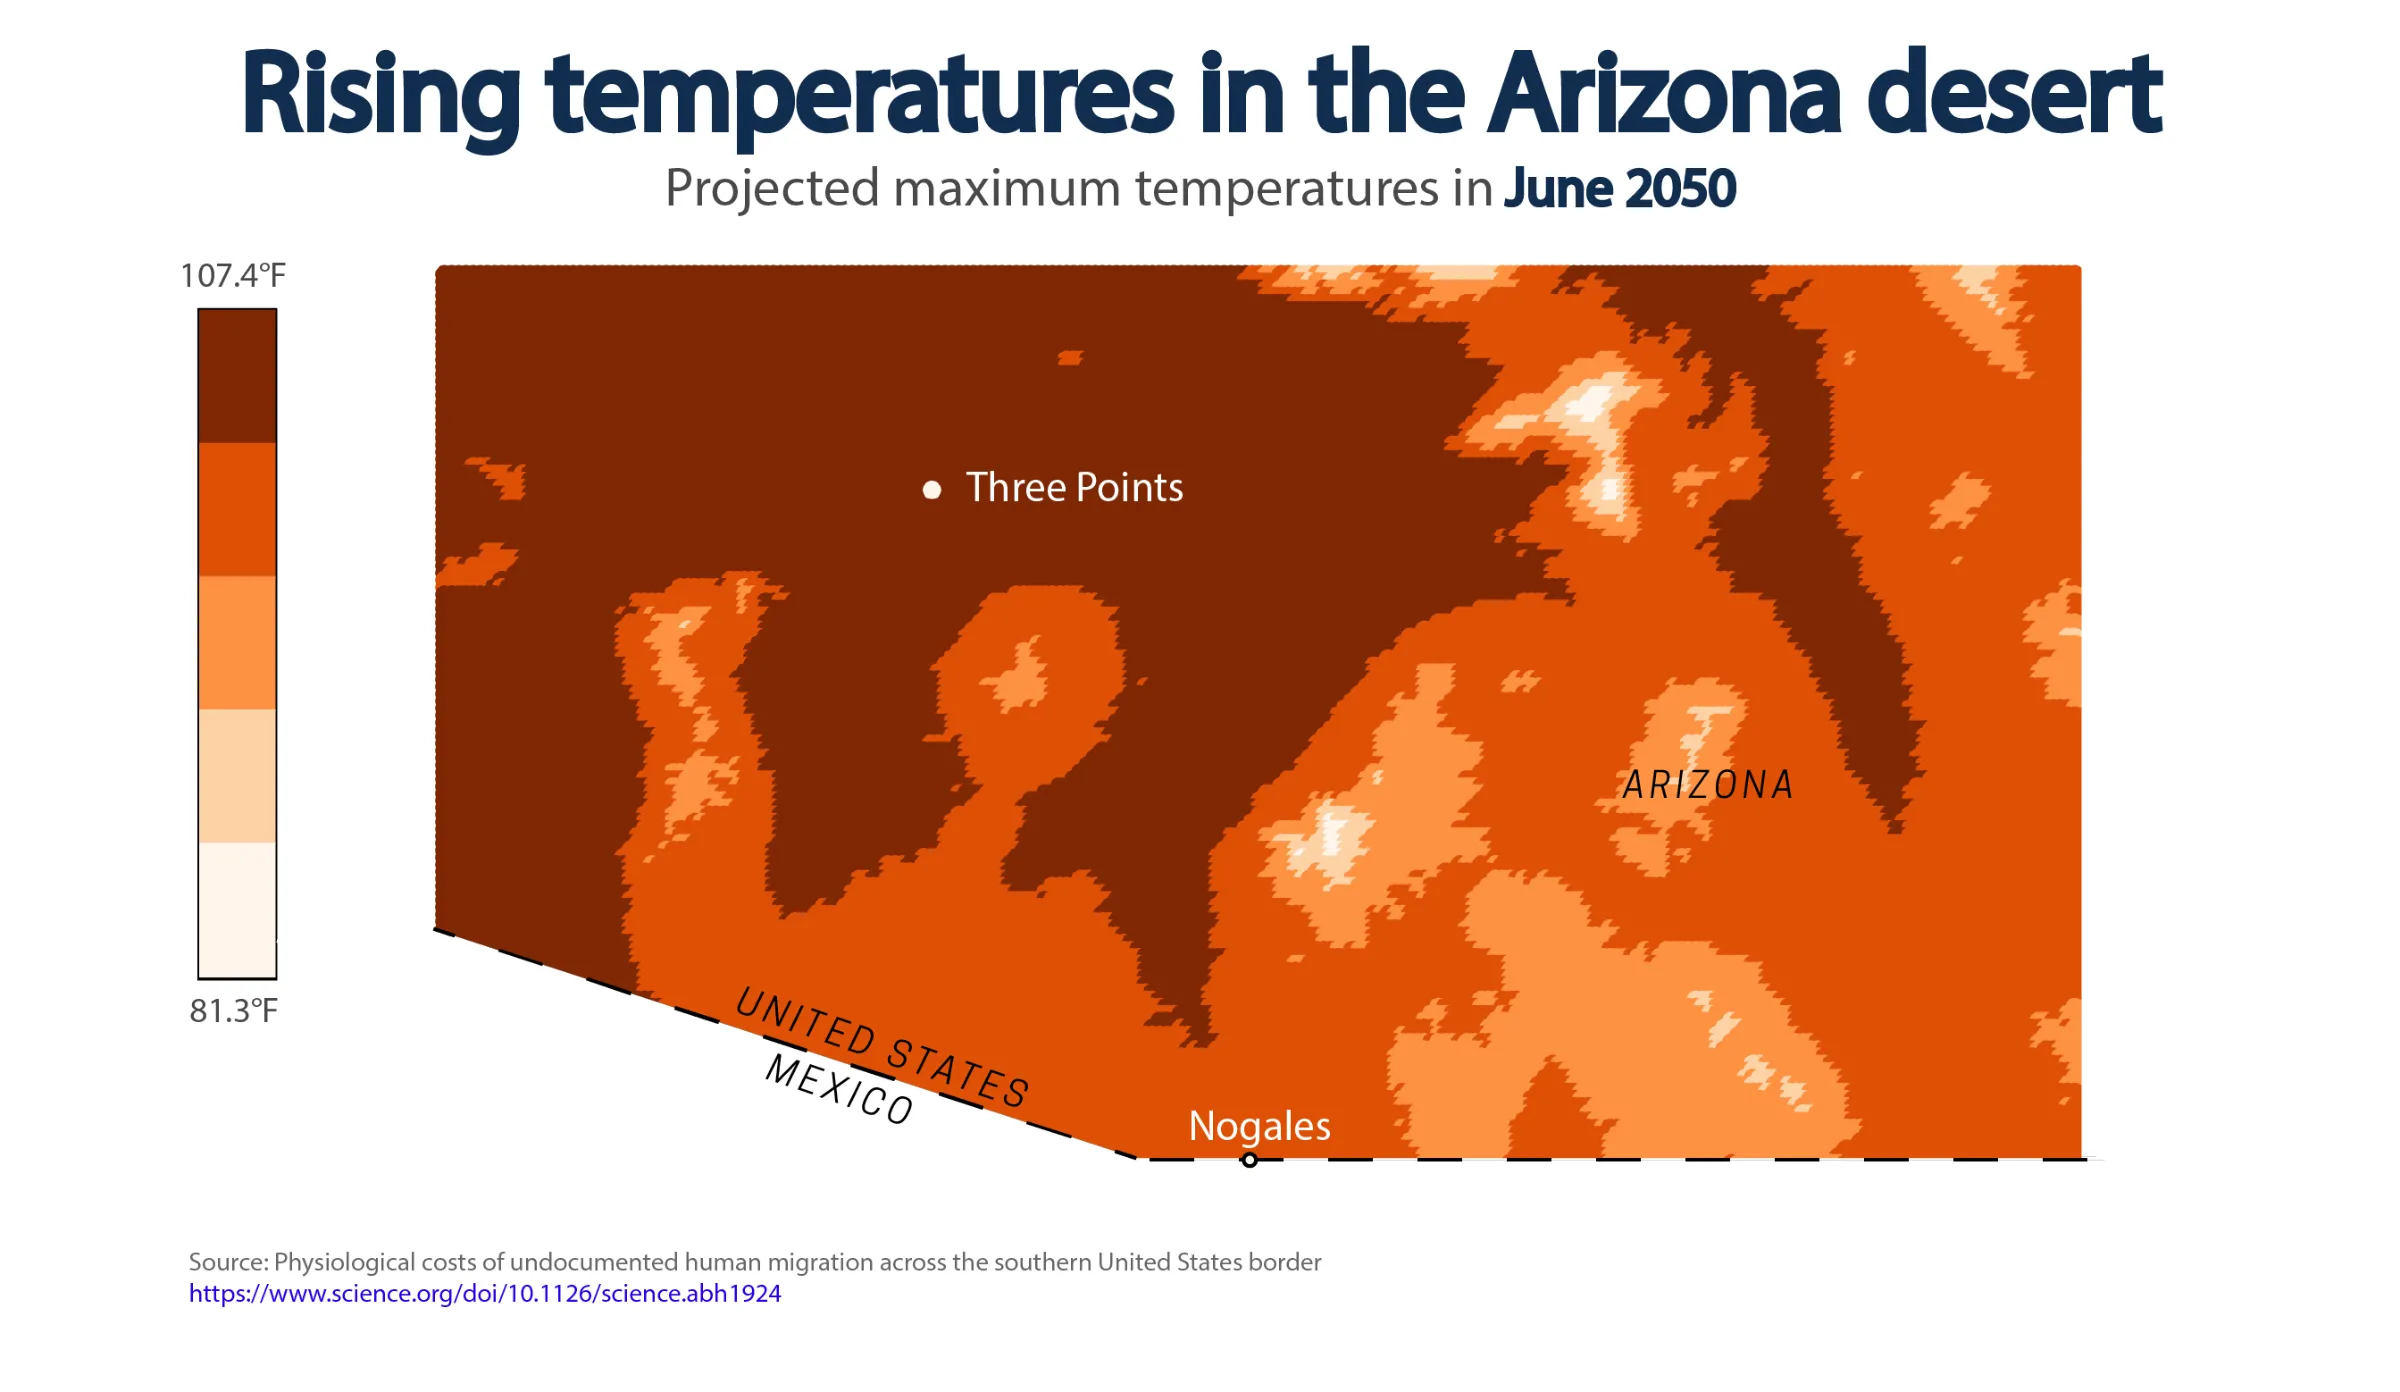 Rising temperatures in the Arizona desert. Daily maximum temperatures registered in June 2020 and projected maximum temperatures in June 2050. Microclimate analysis on the region in Arizona with the highest number reported of number of migrant deaths due to exposure. November 2, 2022. Thomson Reuters Foundation/Diana Baptista